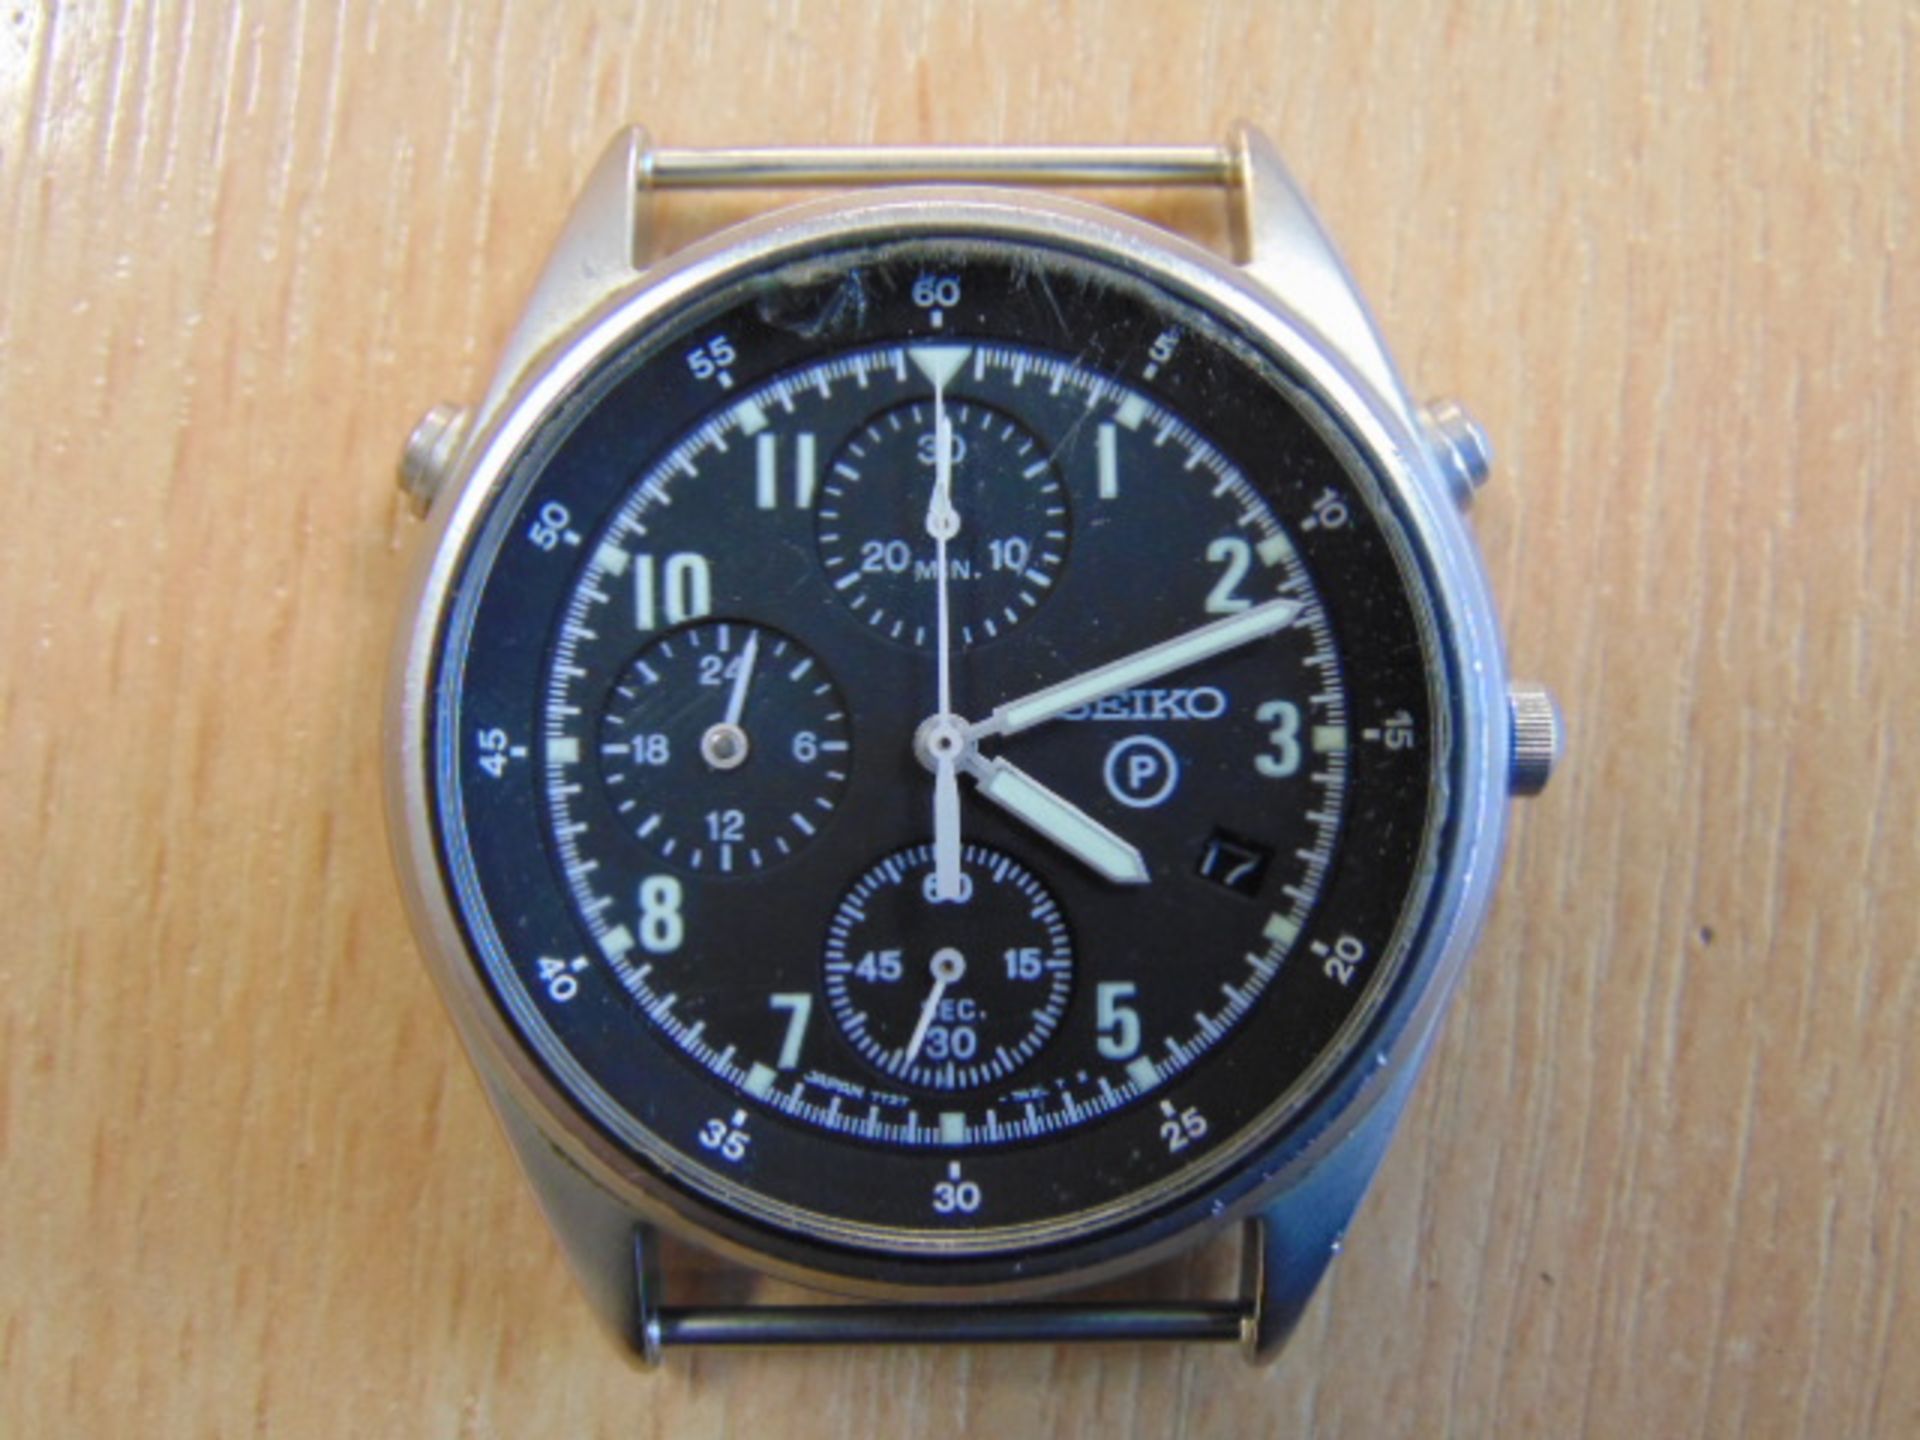 SEIKO GEN 2 PILOTS CHRONO RAF ISSUE NATO MARKED DATED 1994 - Image 3 of 6